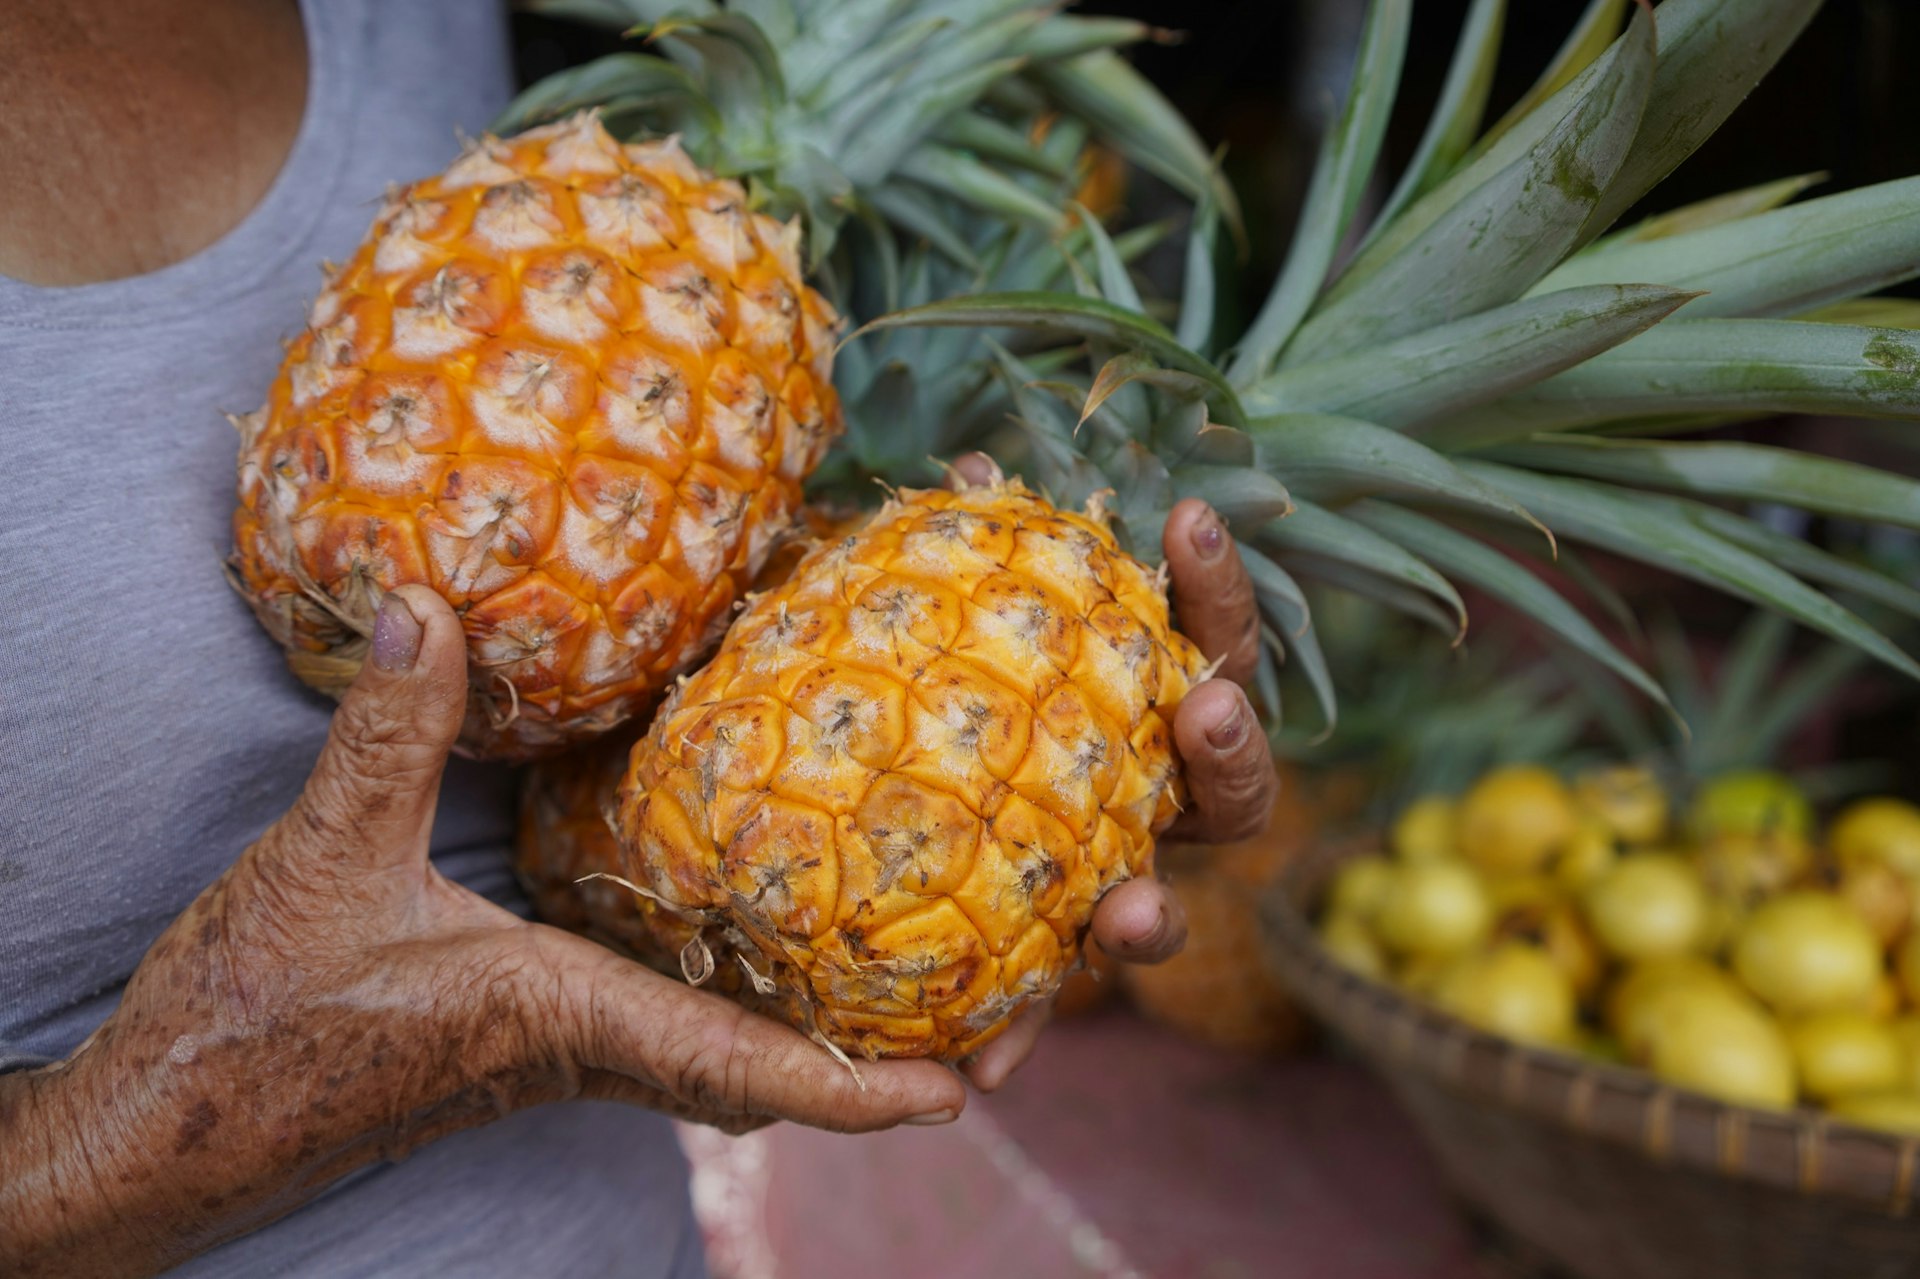 The gnarled hands of a senior hold fresh, ripe pineapples at a farmers' market in Hawaii; Maui sites without tourists